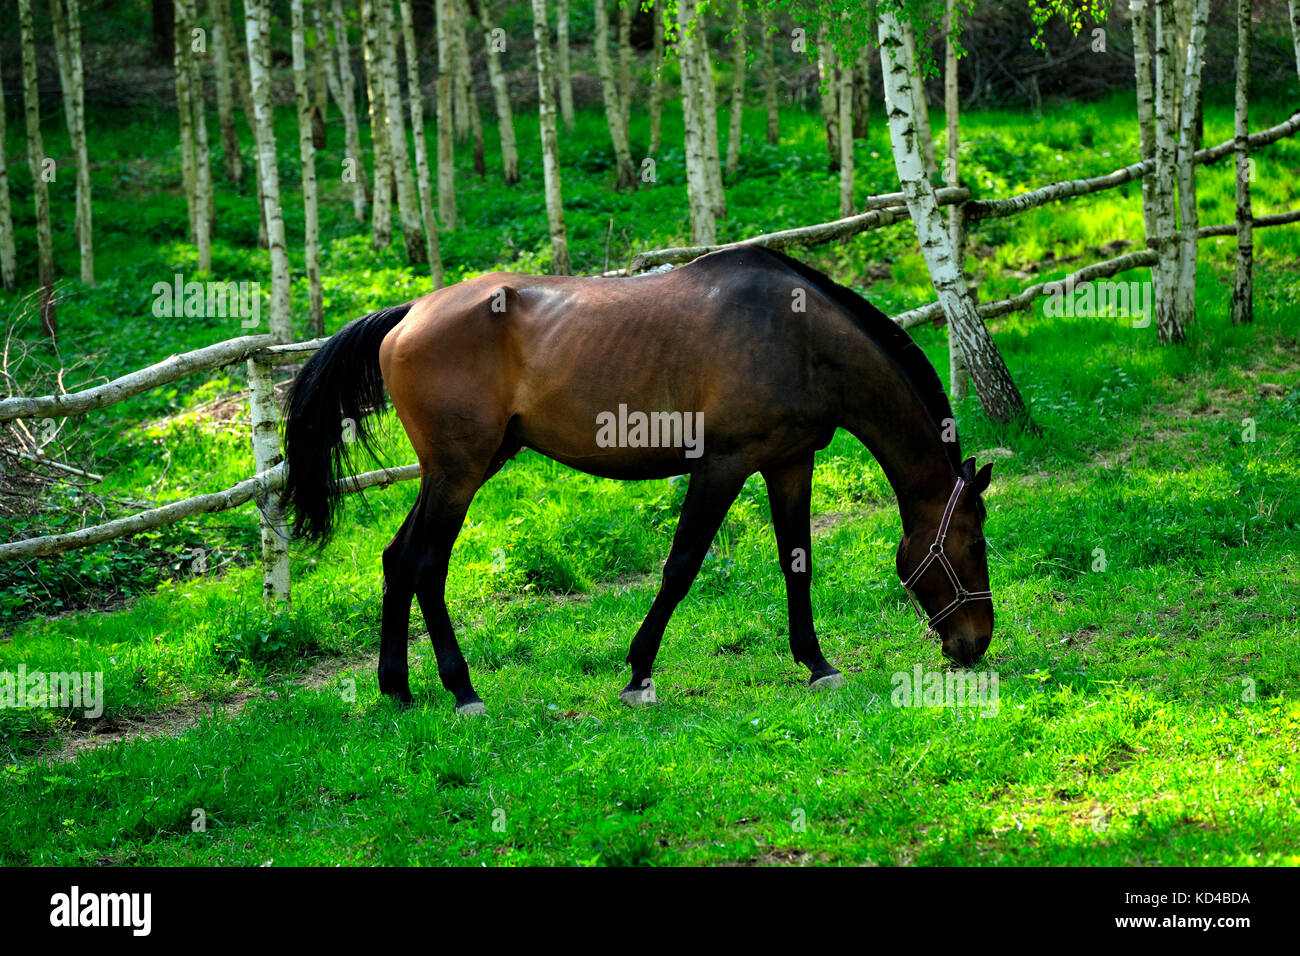 pasture, country, calm, nature, horses, beauty, spring, summer, Stock Photo